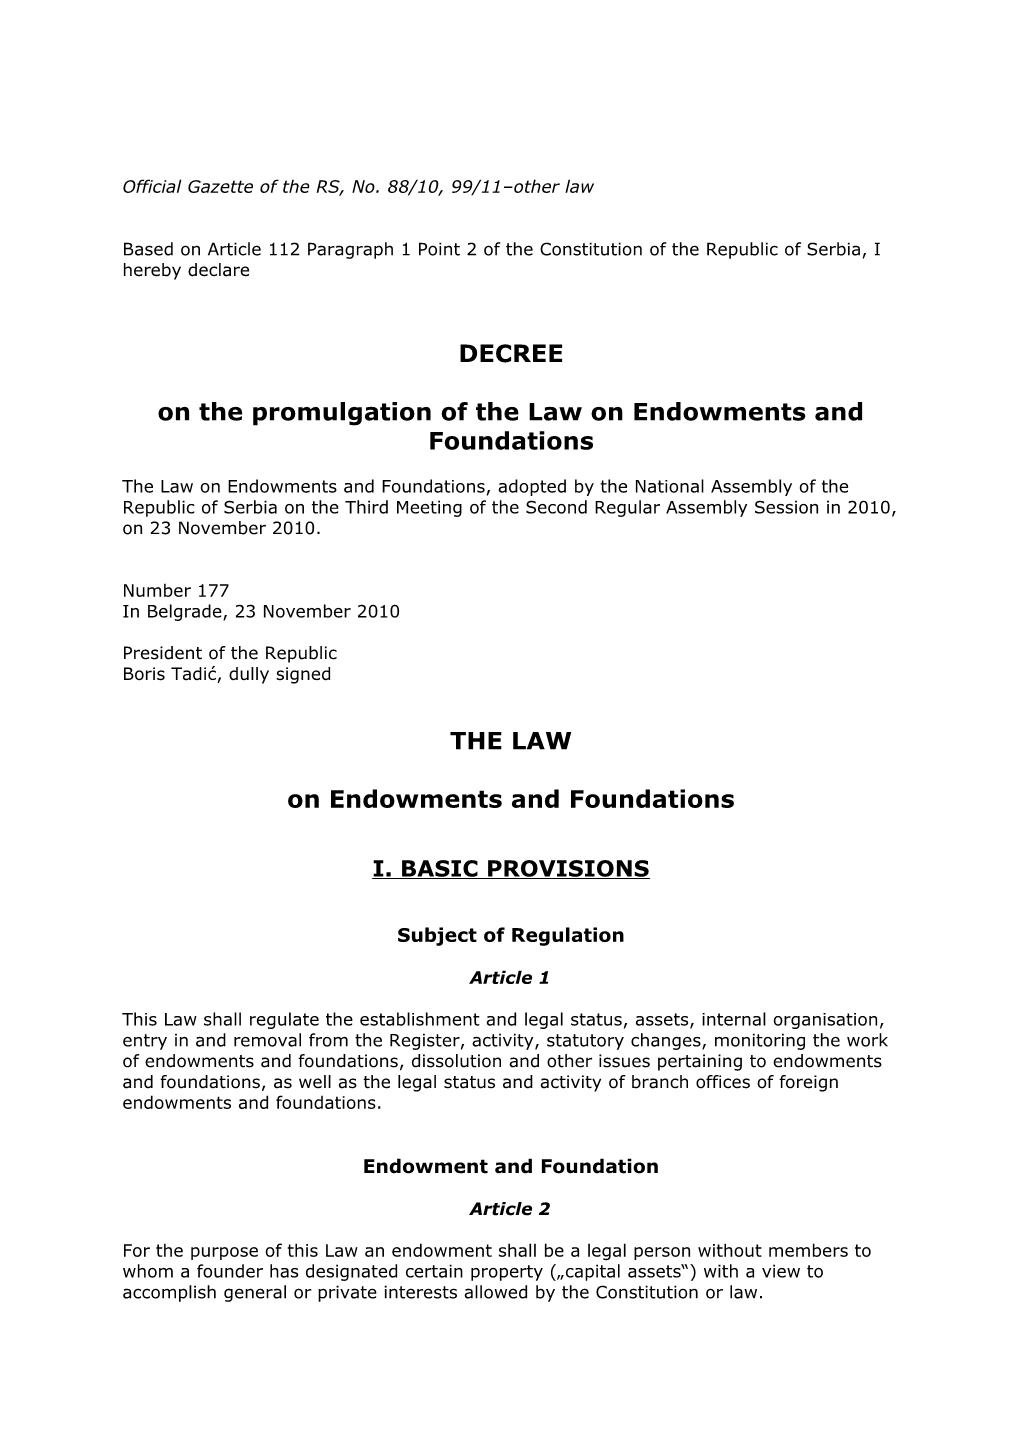 Official Gazette of the RS, No. 88/10, 99/11 Other Law